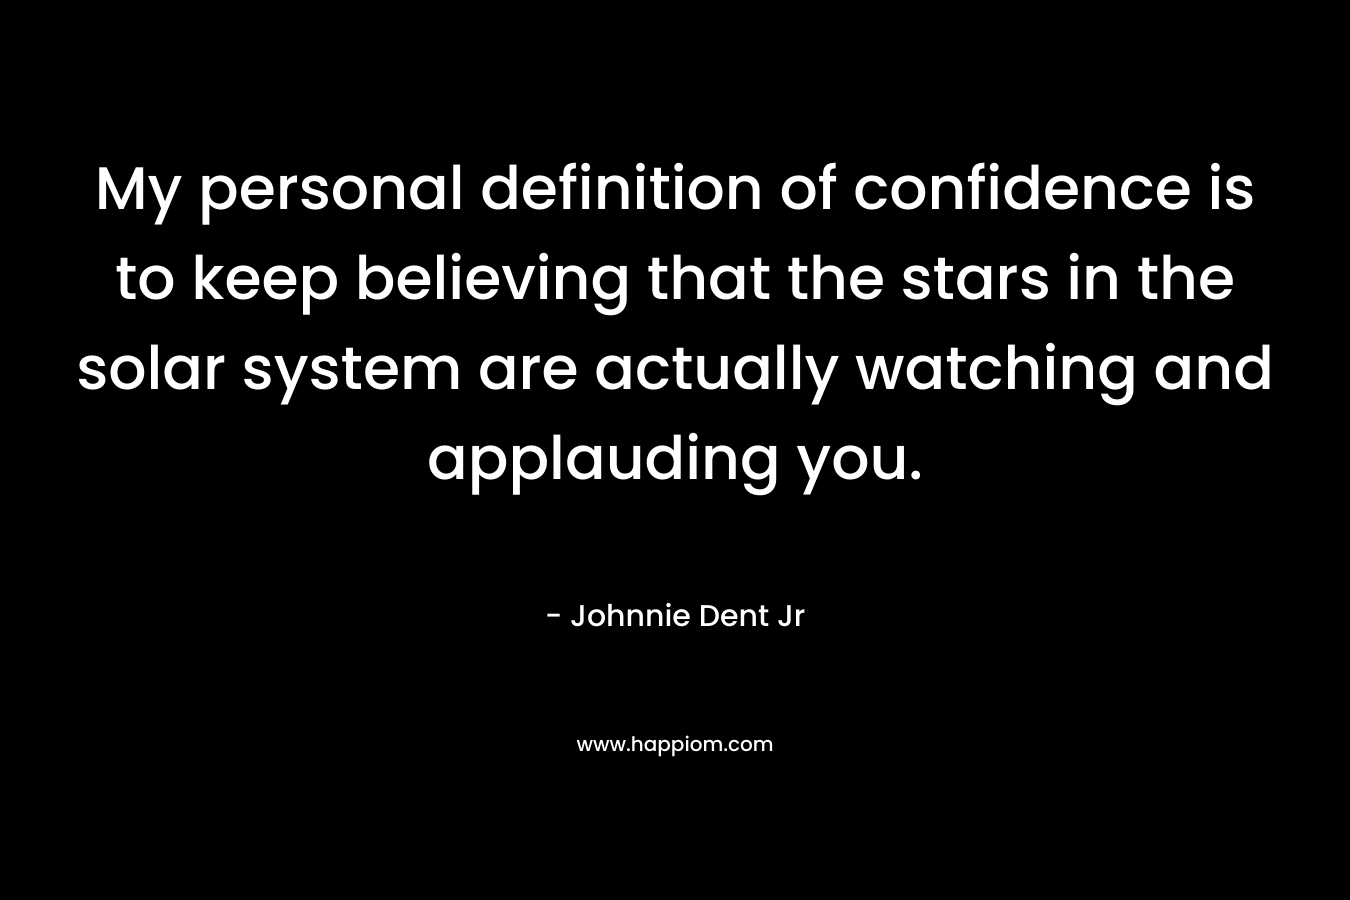 My personal definition of confidence is to keep believing that the stars in the solar system are actually watching and applauding you. – Johnnie Dent Jr